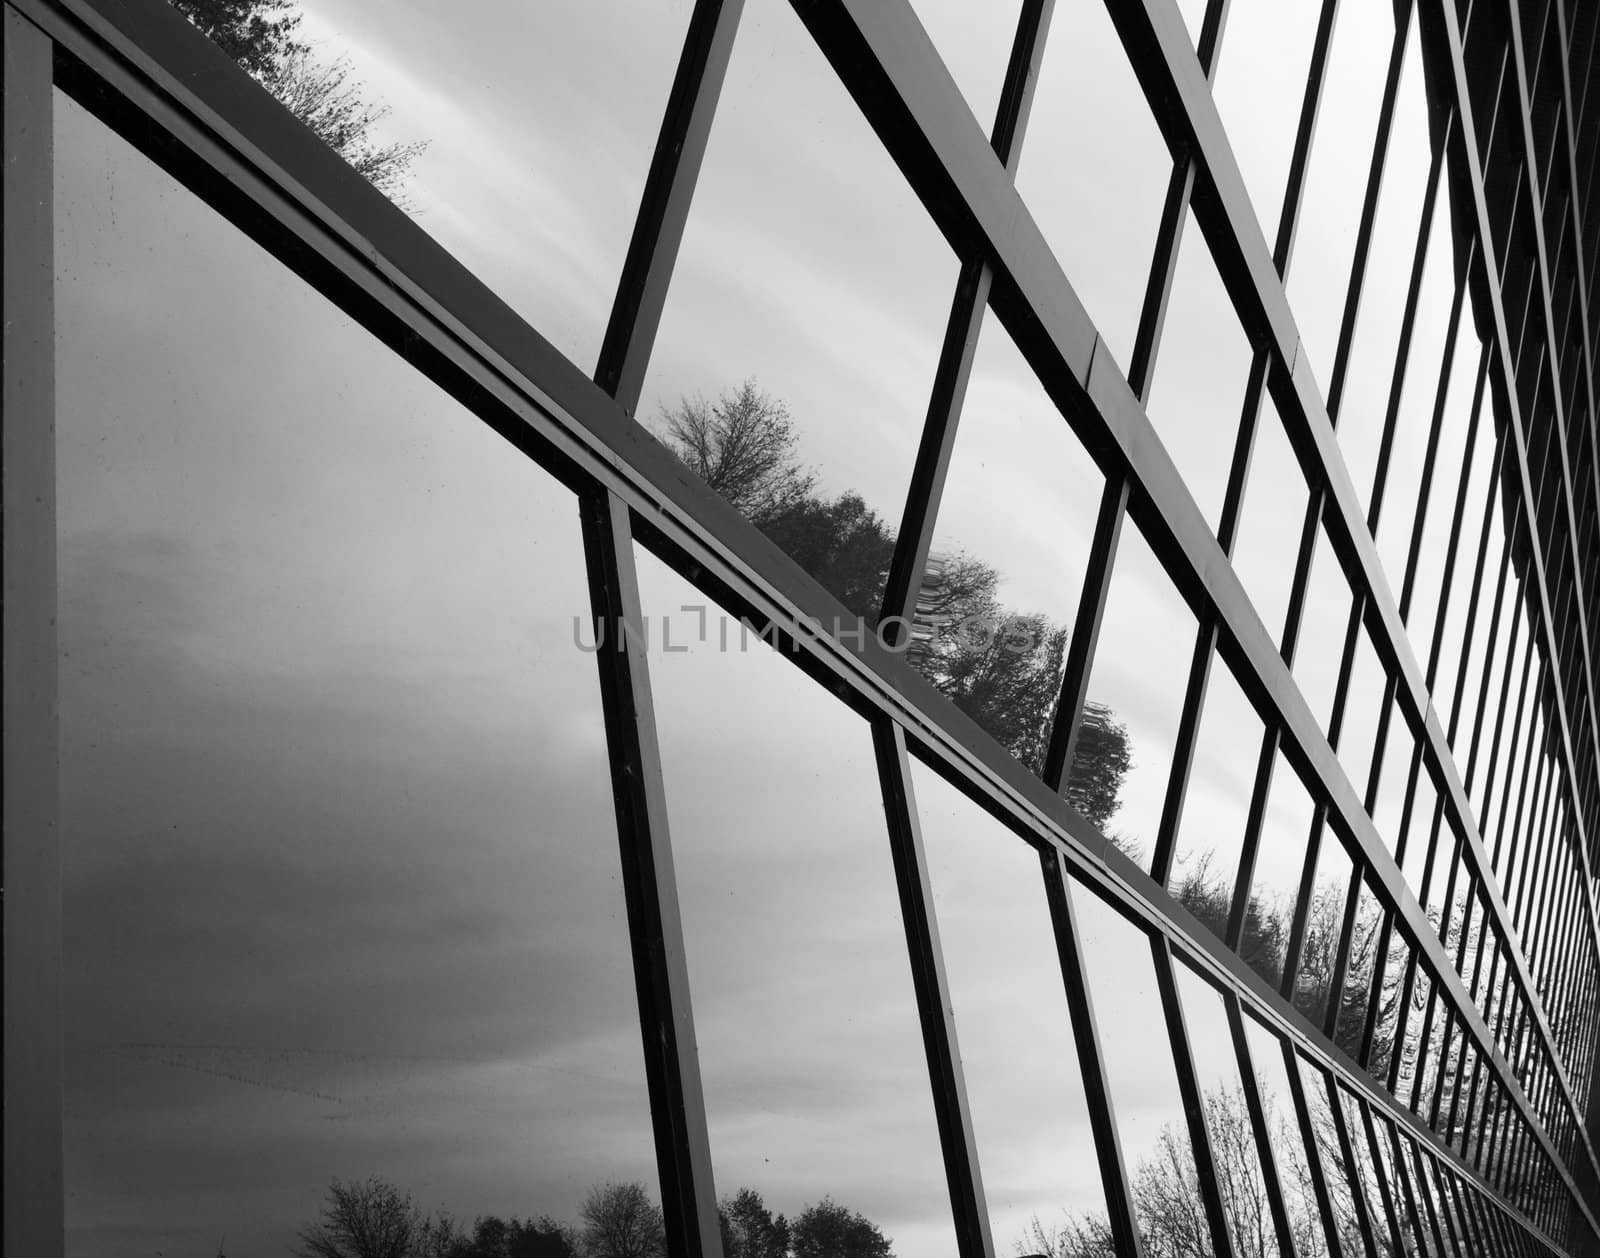 Glass window wall that is angled inward in black and white reflecting some trees